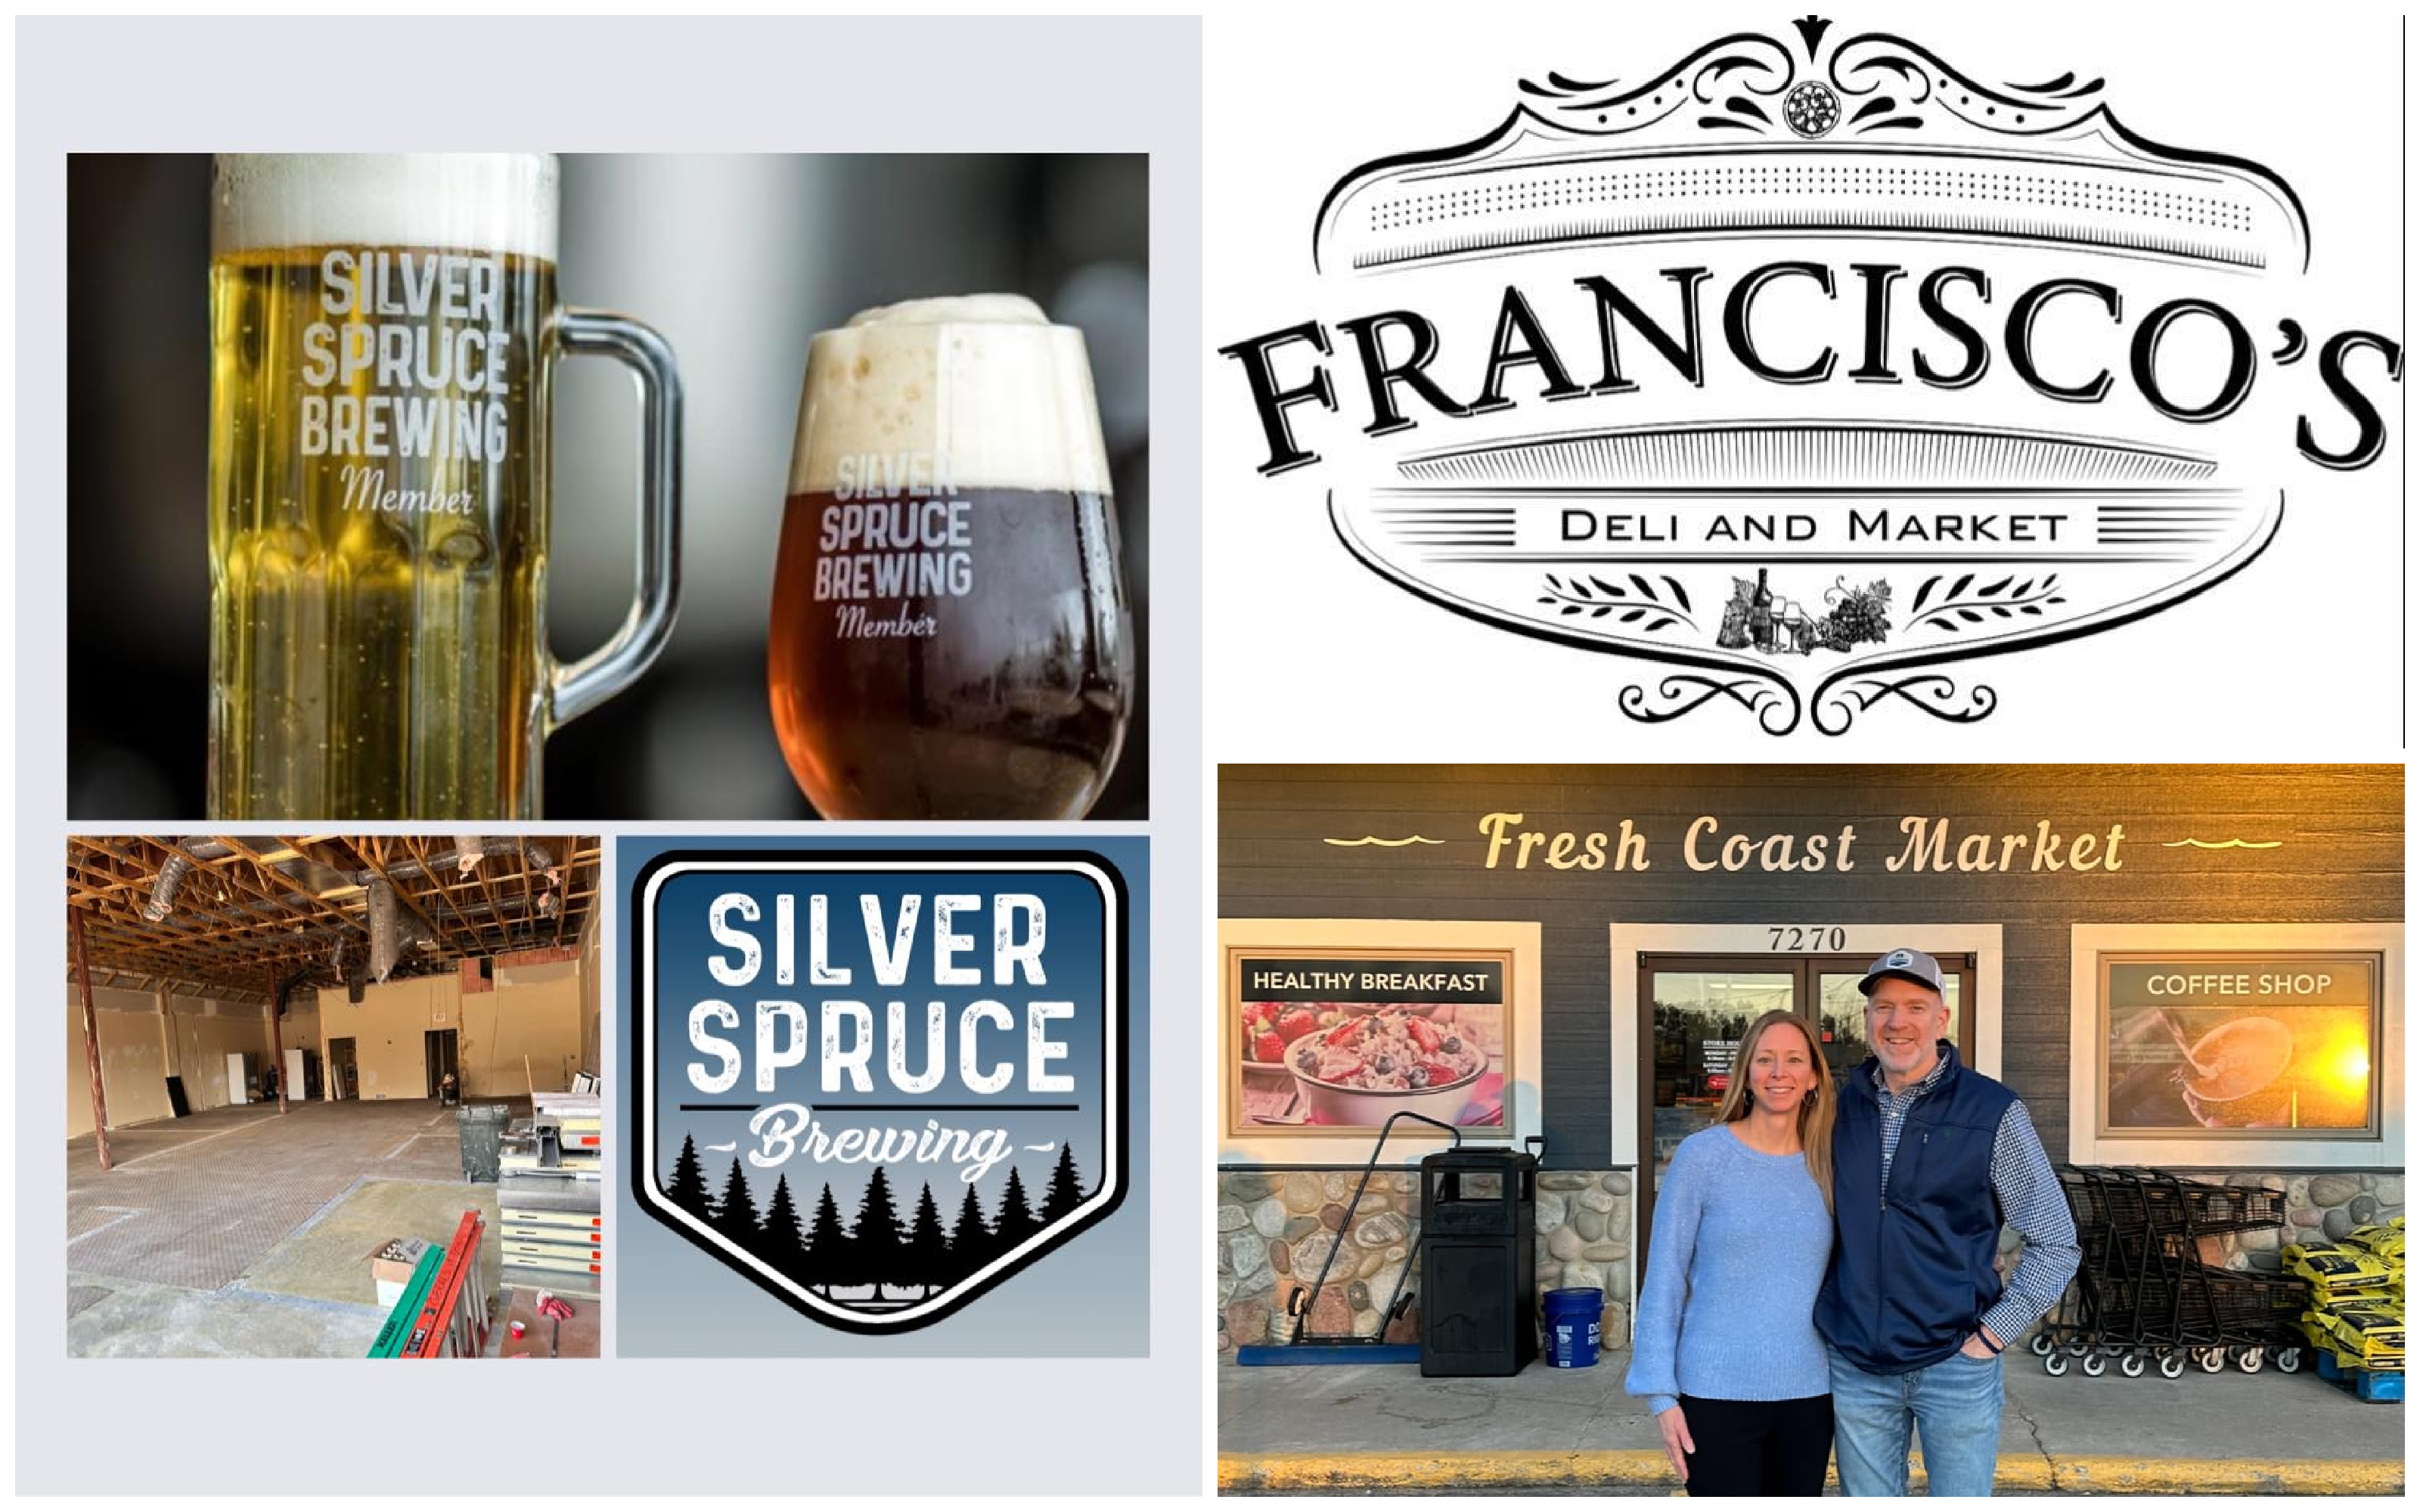 Silver Spruce Brewing to Open Second Brewery; Fresh Coast Market For Sale; More Restaurant/Retail News